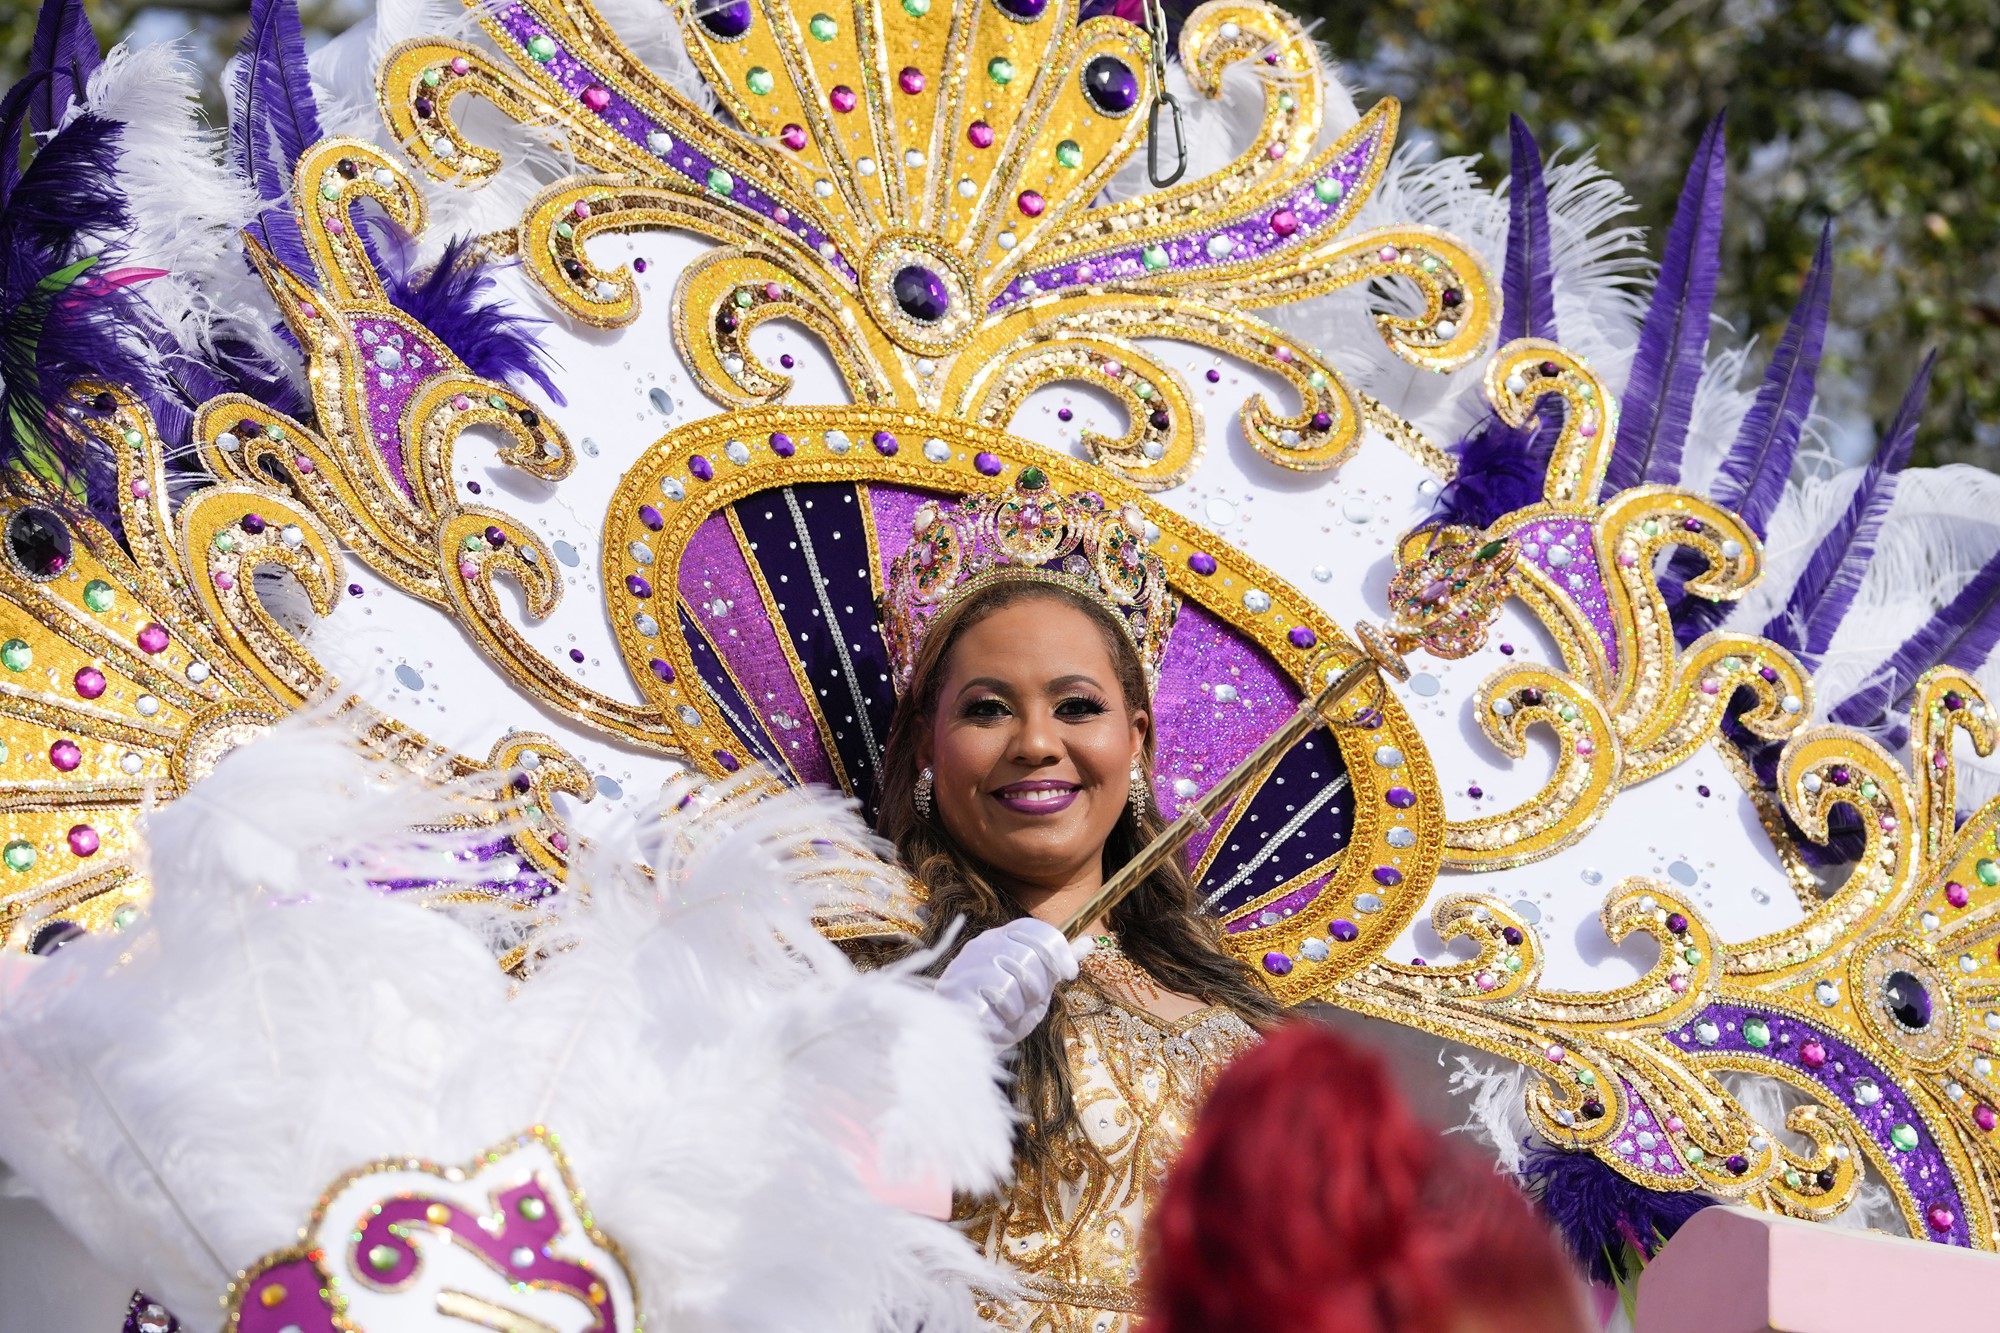 A woman in an elaborate gold costume that fans out behind her like a peacock tail. 